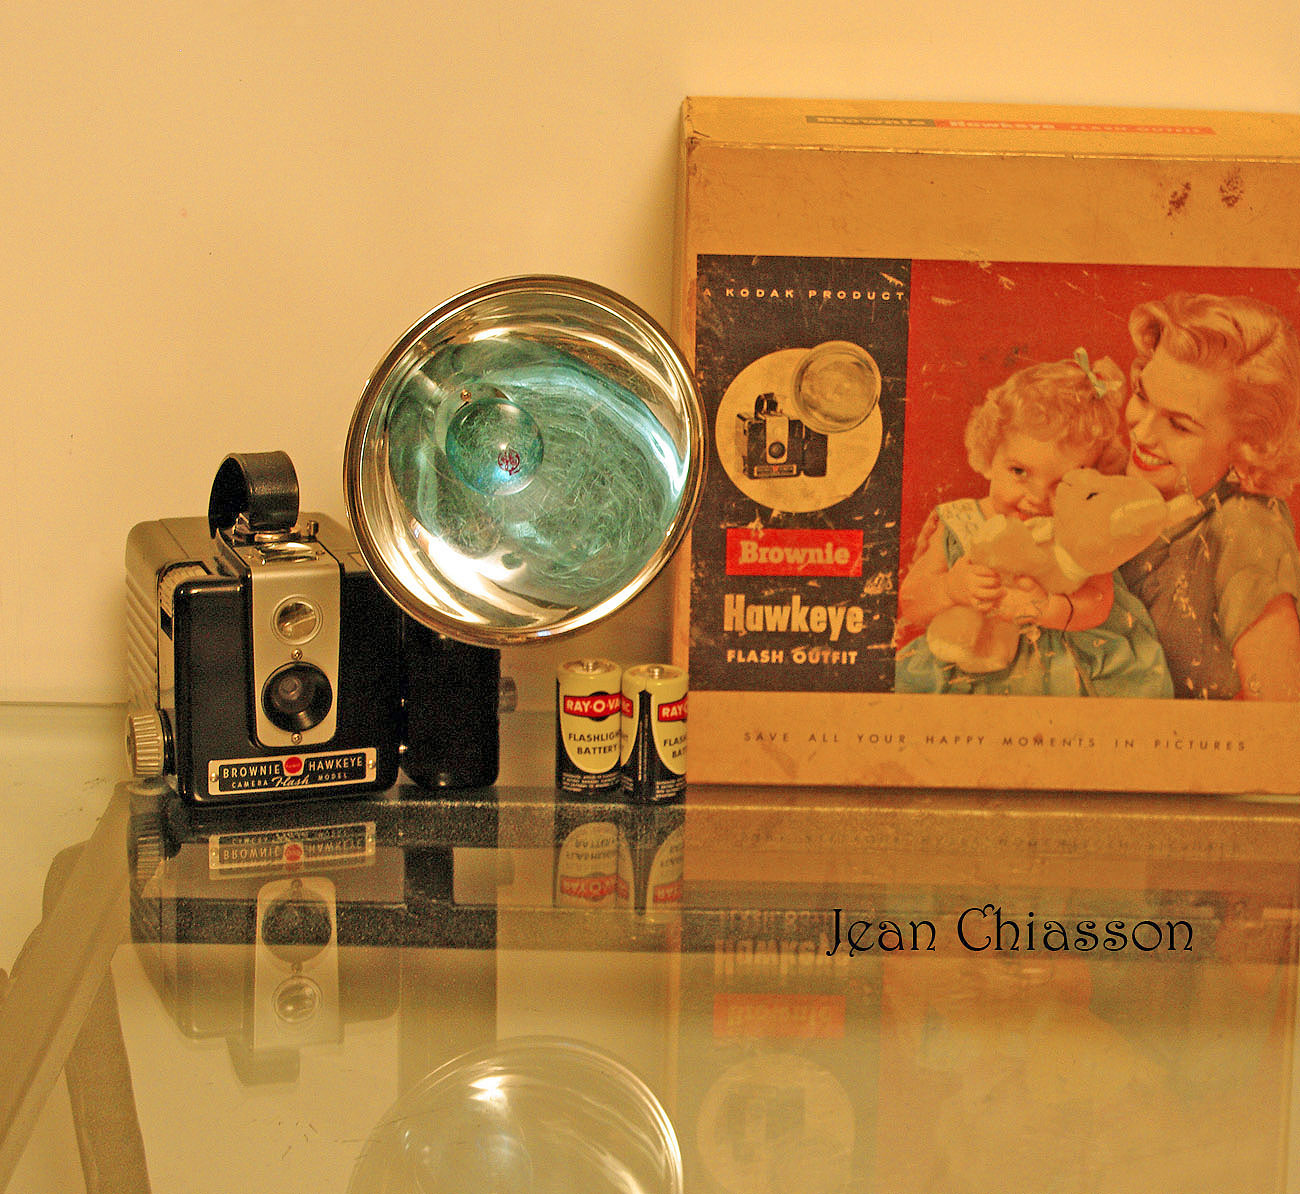 There is my new Camera ! ( kodak brownie Flash  )  Type: Box rollfilm Introduced 1949 Film size: 620 Picture size: 2 1/4 X 2 1/4